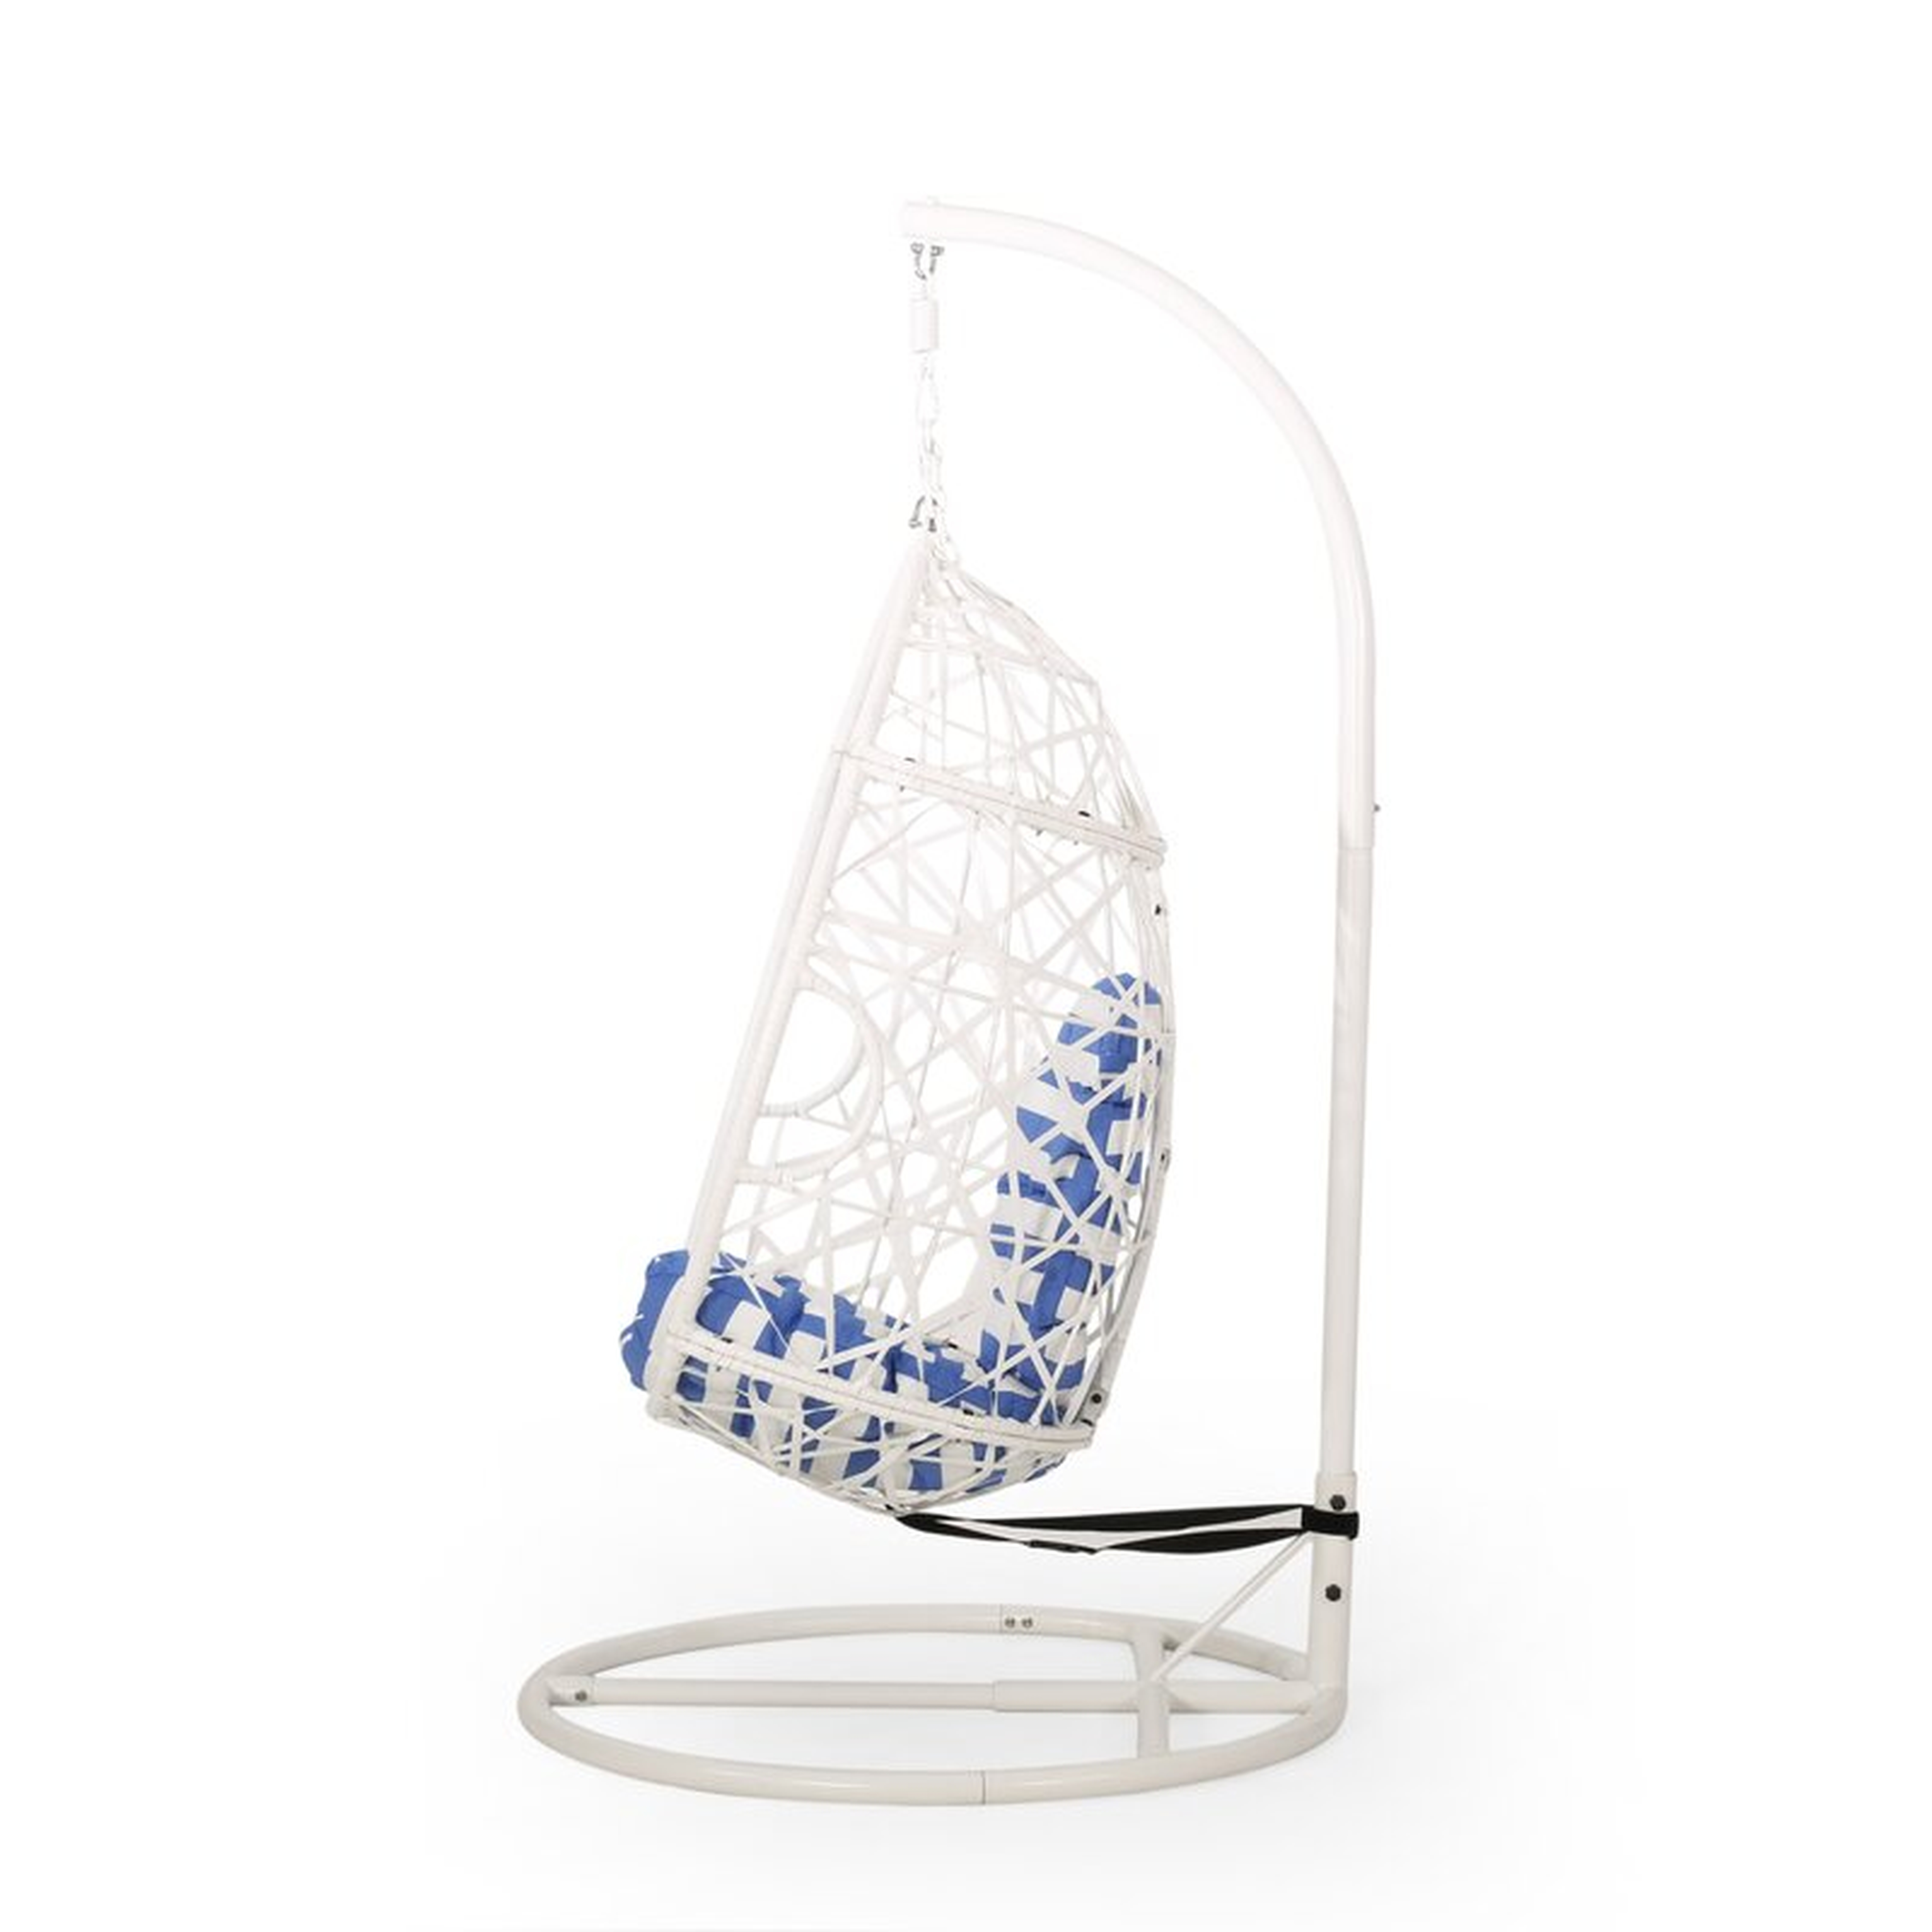 Anner Tear Drop Swing Chair with Stand - Wayfair